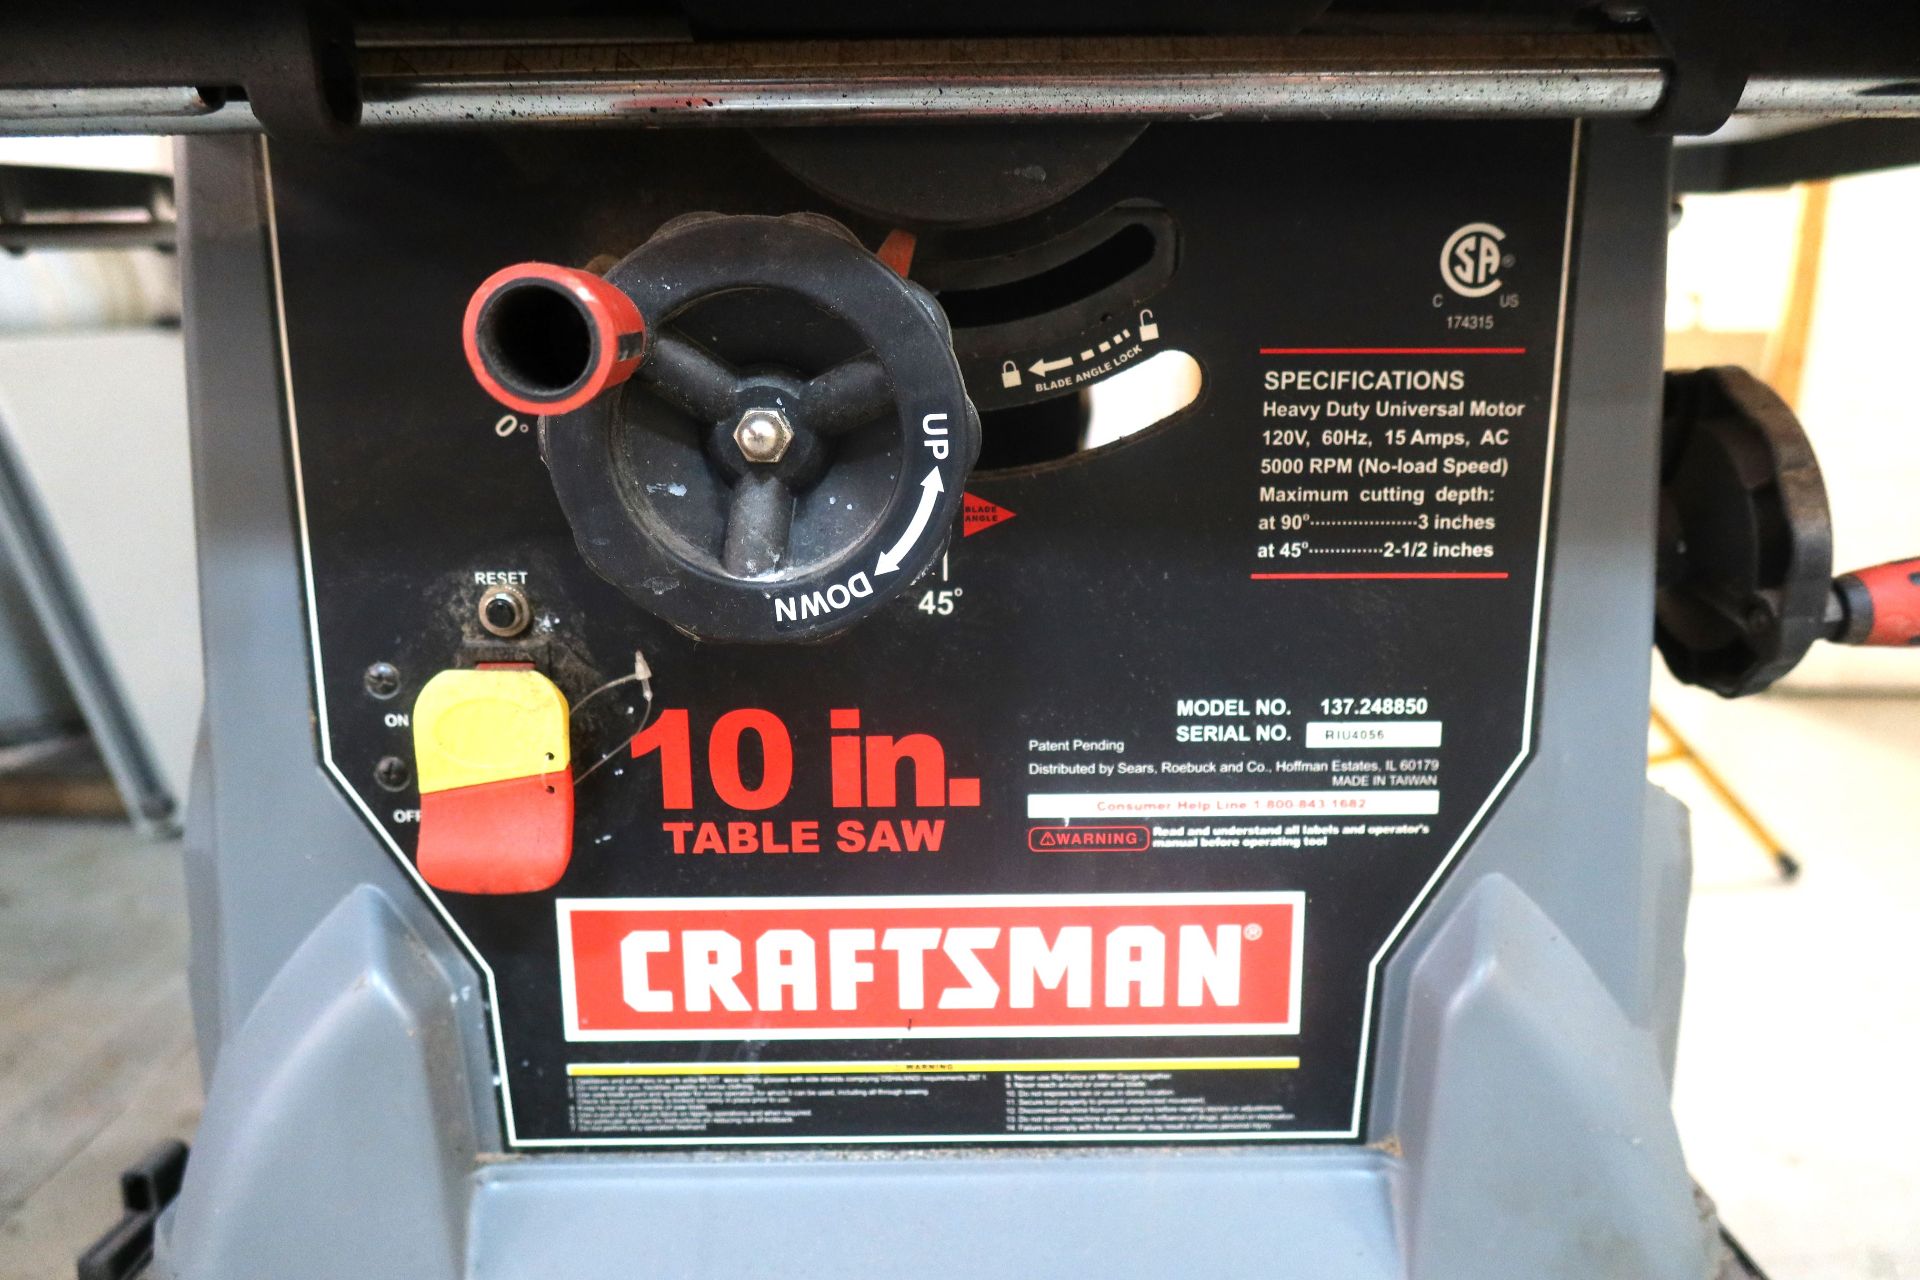 Craftsman 10" Table Saw - Image 2 of 2